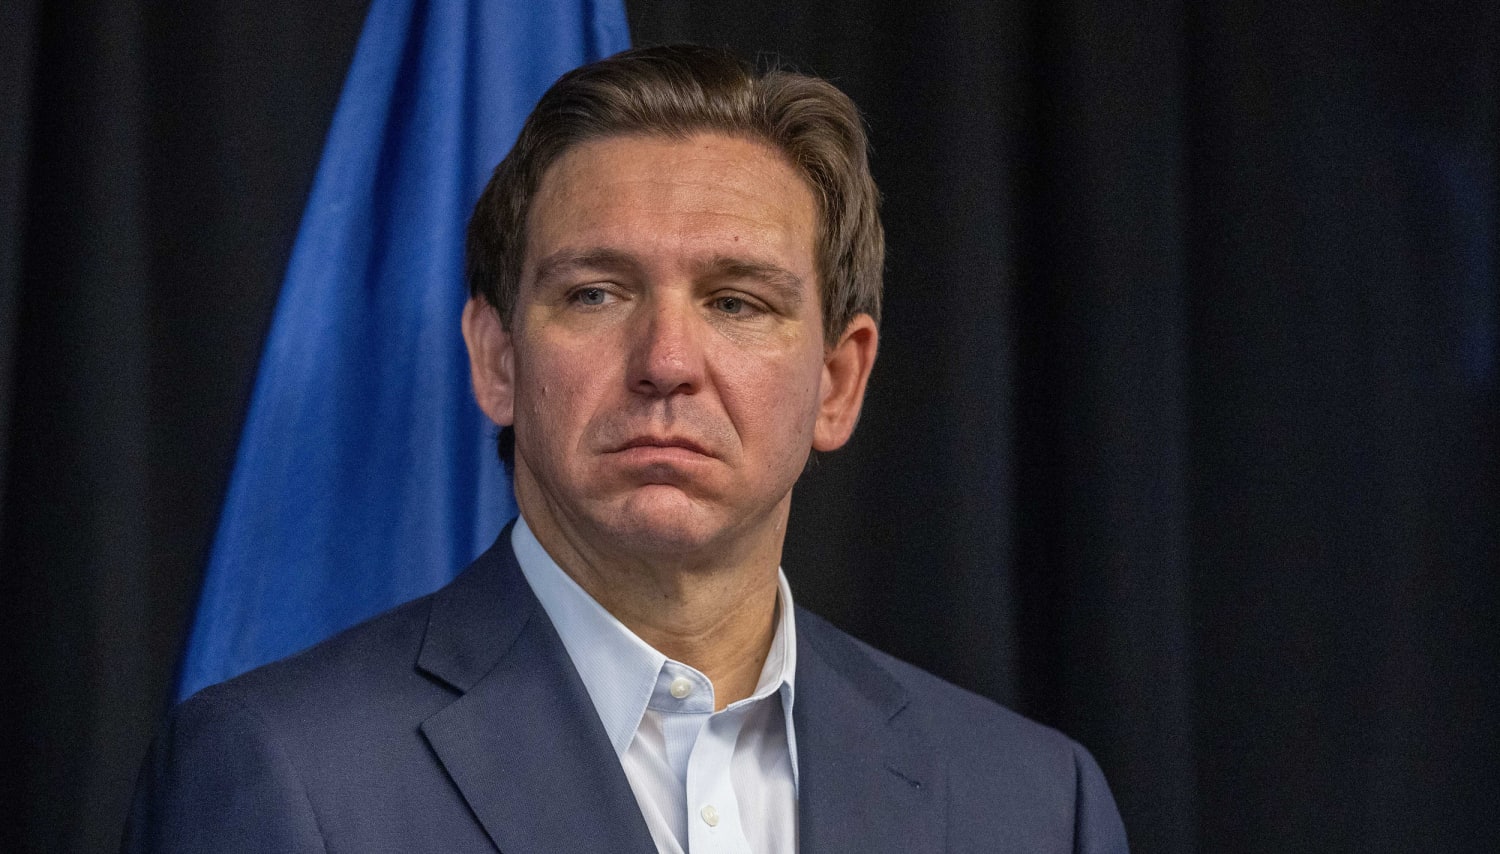 Judge recuses himself from Disney suit against DeSantis and accuses governor of 'rank judge-shopping'